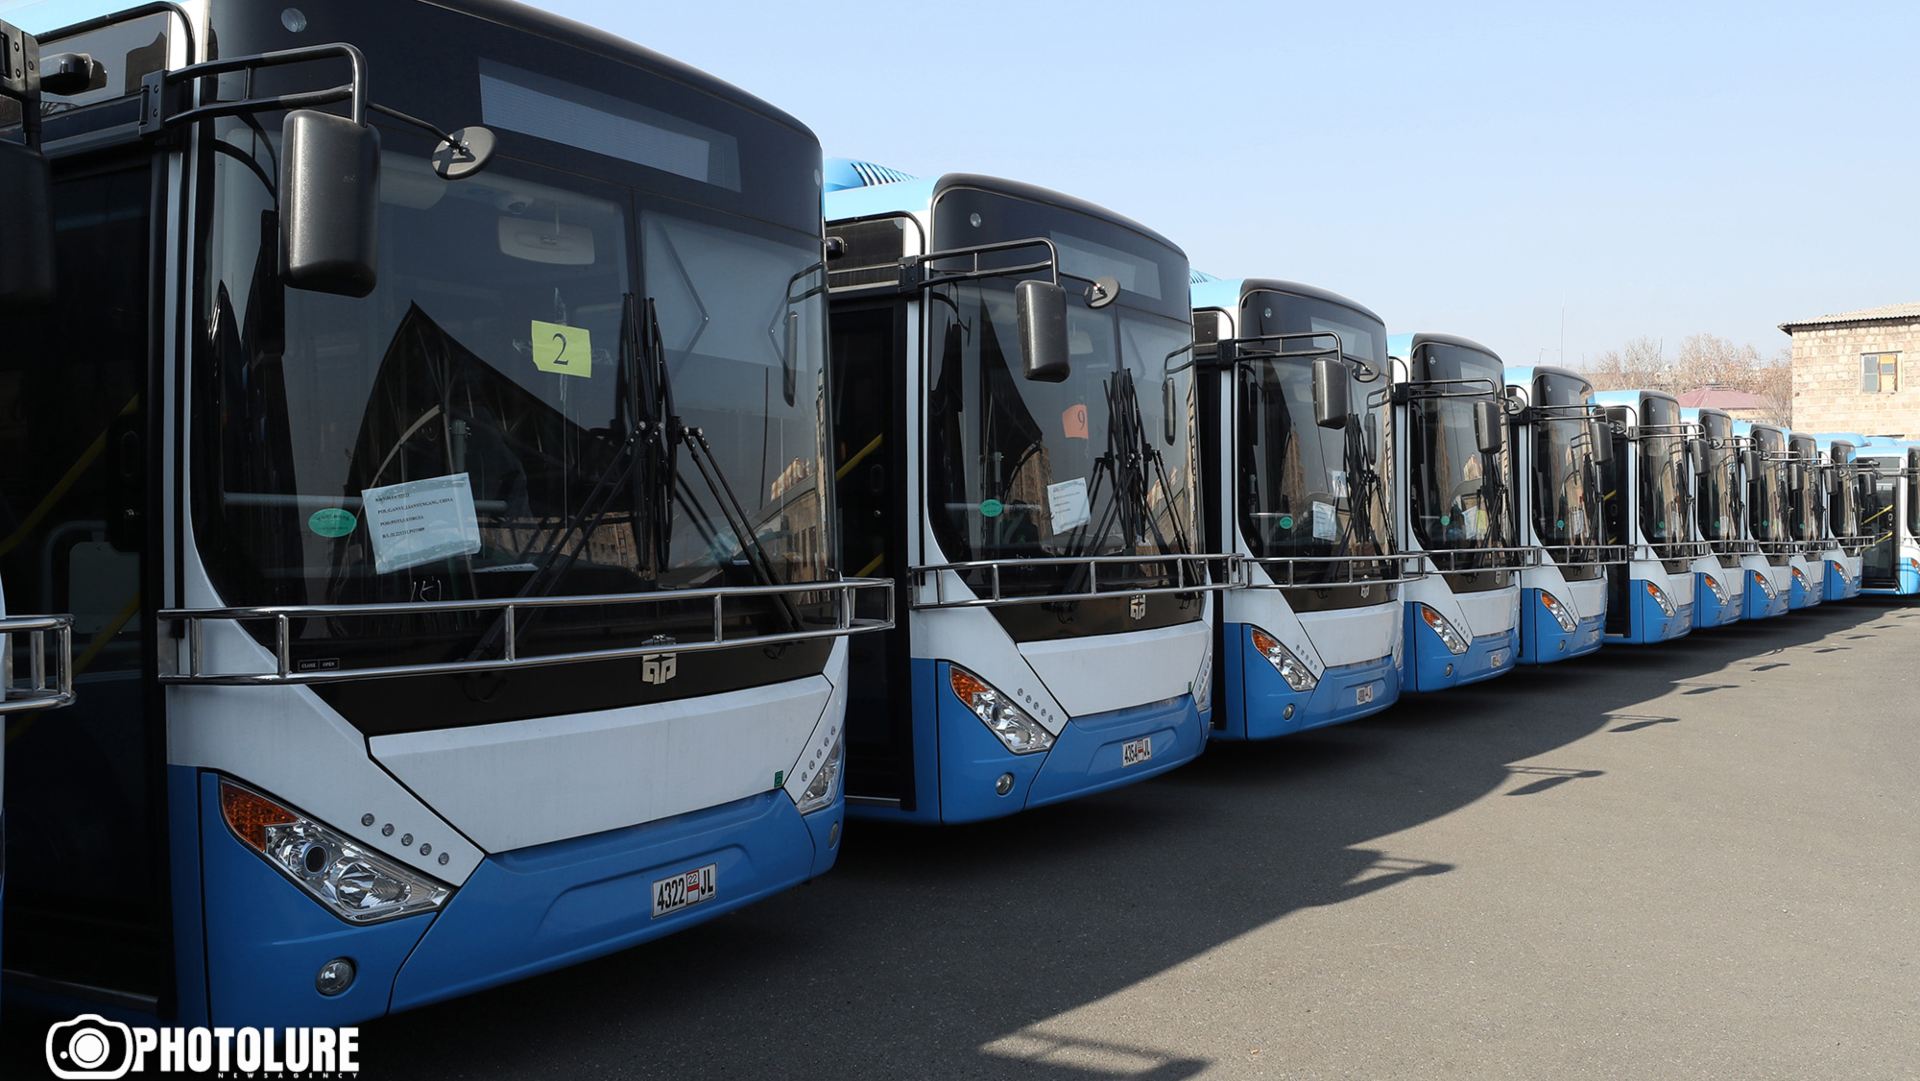 Fare hike on hold as Yerevan eyes transport reform